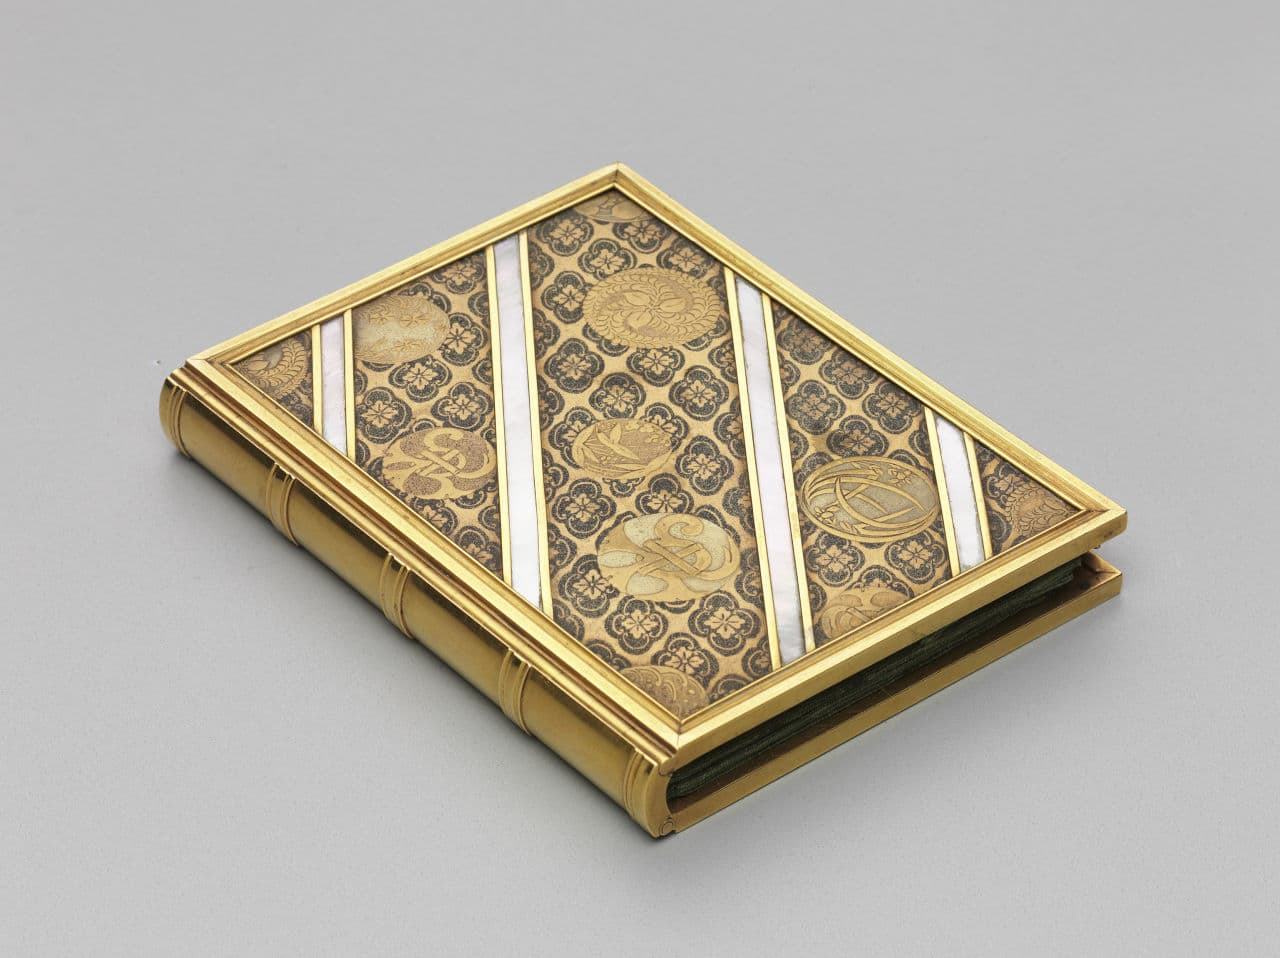 Souvenir notebook with pen. 19th century. Gold, lacquer, mother of pearl. Gift of the heirs of Bettina Looram de Rothschild. (Courtesy Museum of Fine Arts, Boston)